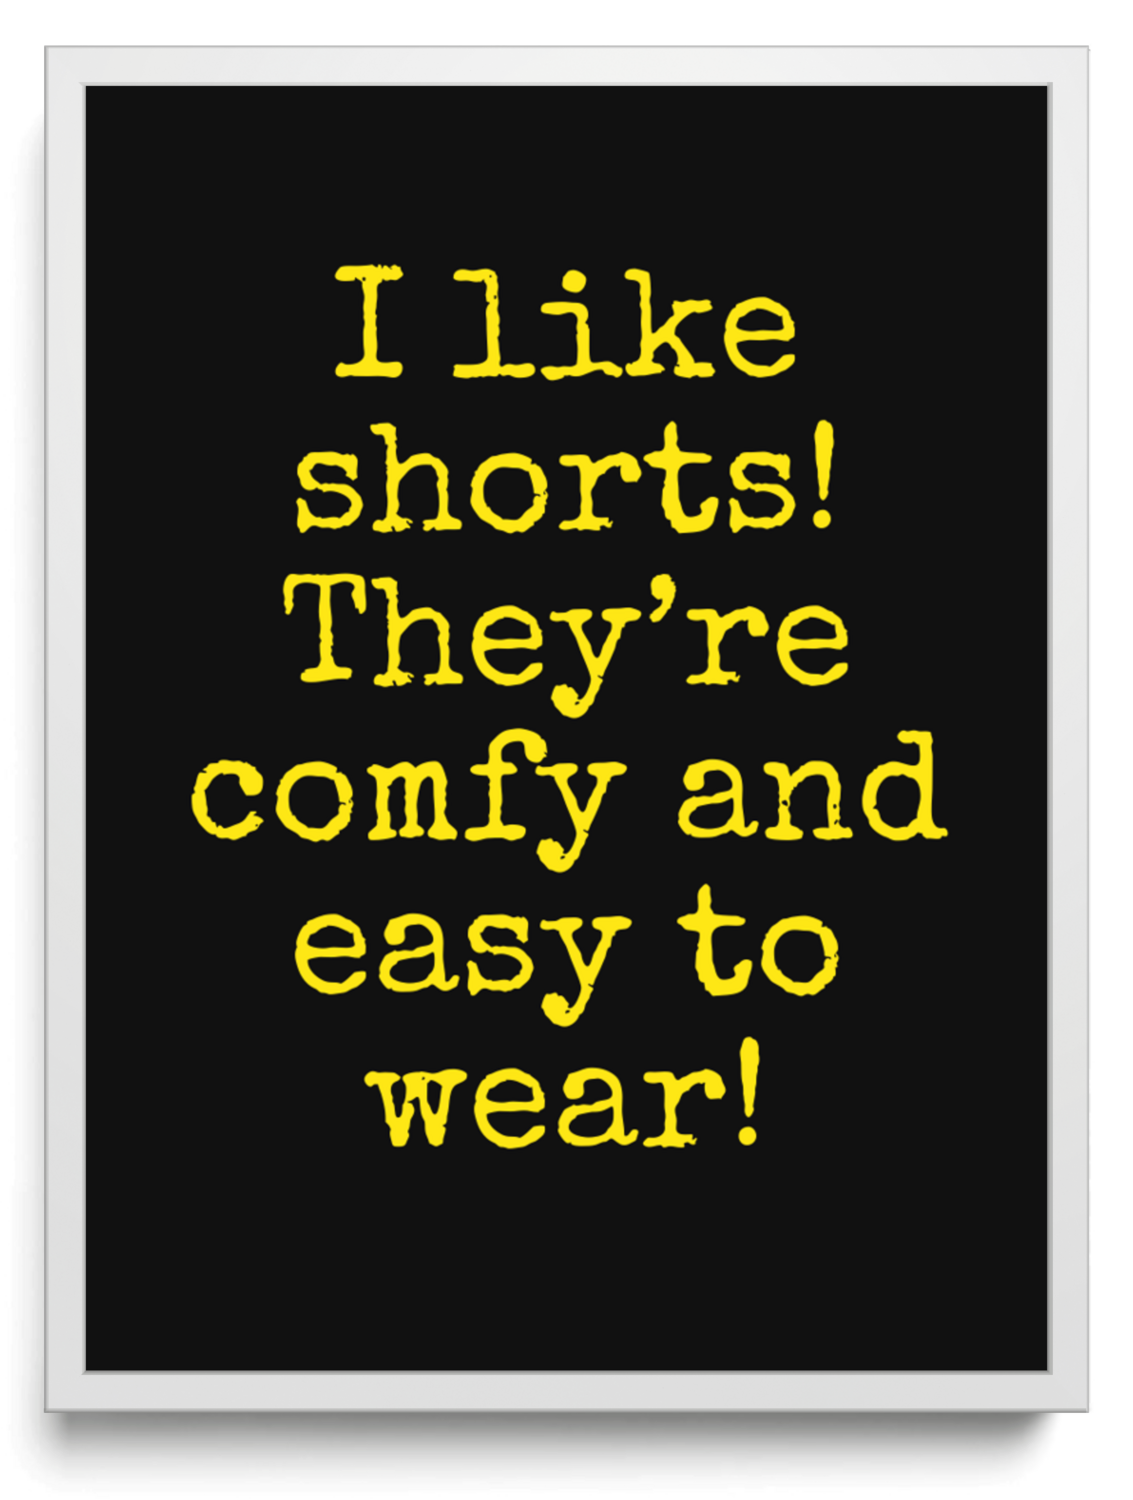 I like shorts! They’re comfy and easy to wear! framed typographic print